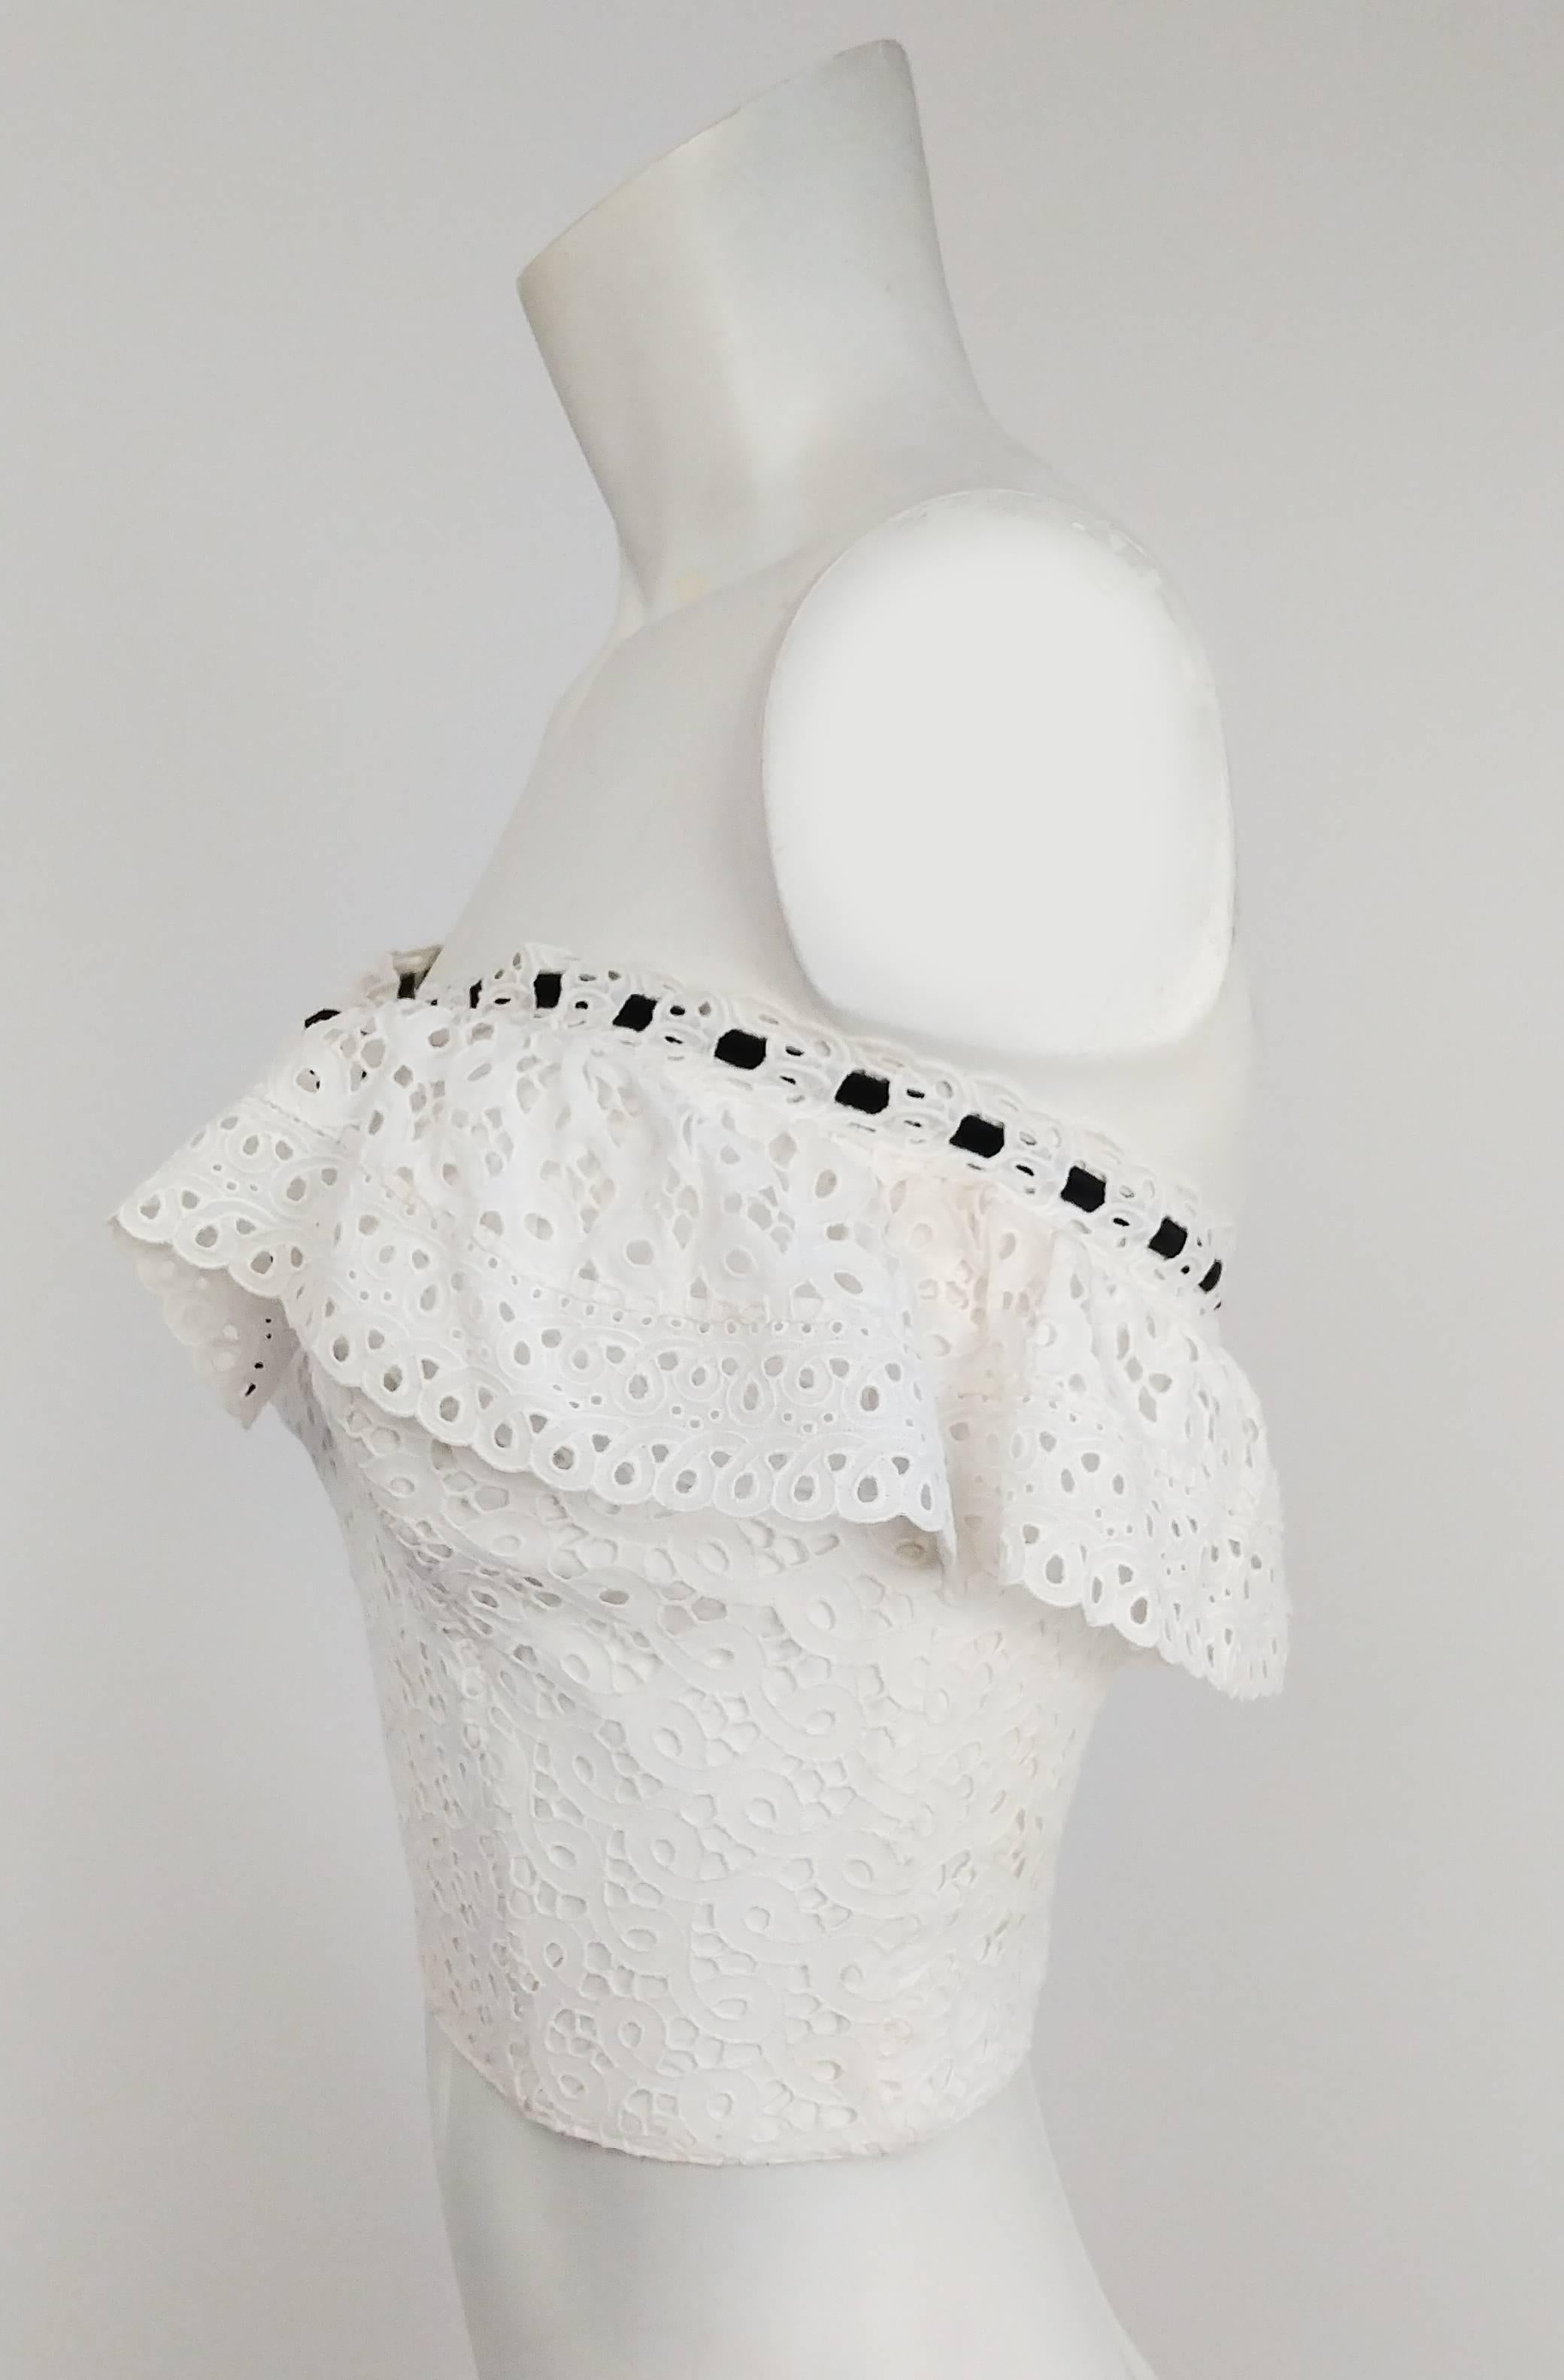 1950s White Cotton Eyelet Lace Bustier Top. Black ribbon trim ties in bow in front over ruffle. Fully lined and boned. Hook & eye back closure.